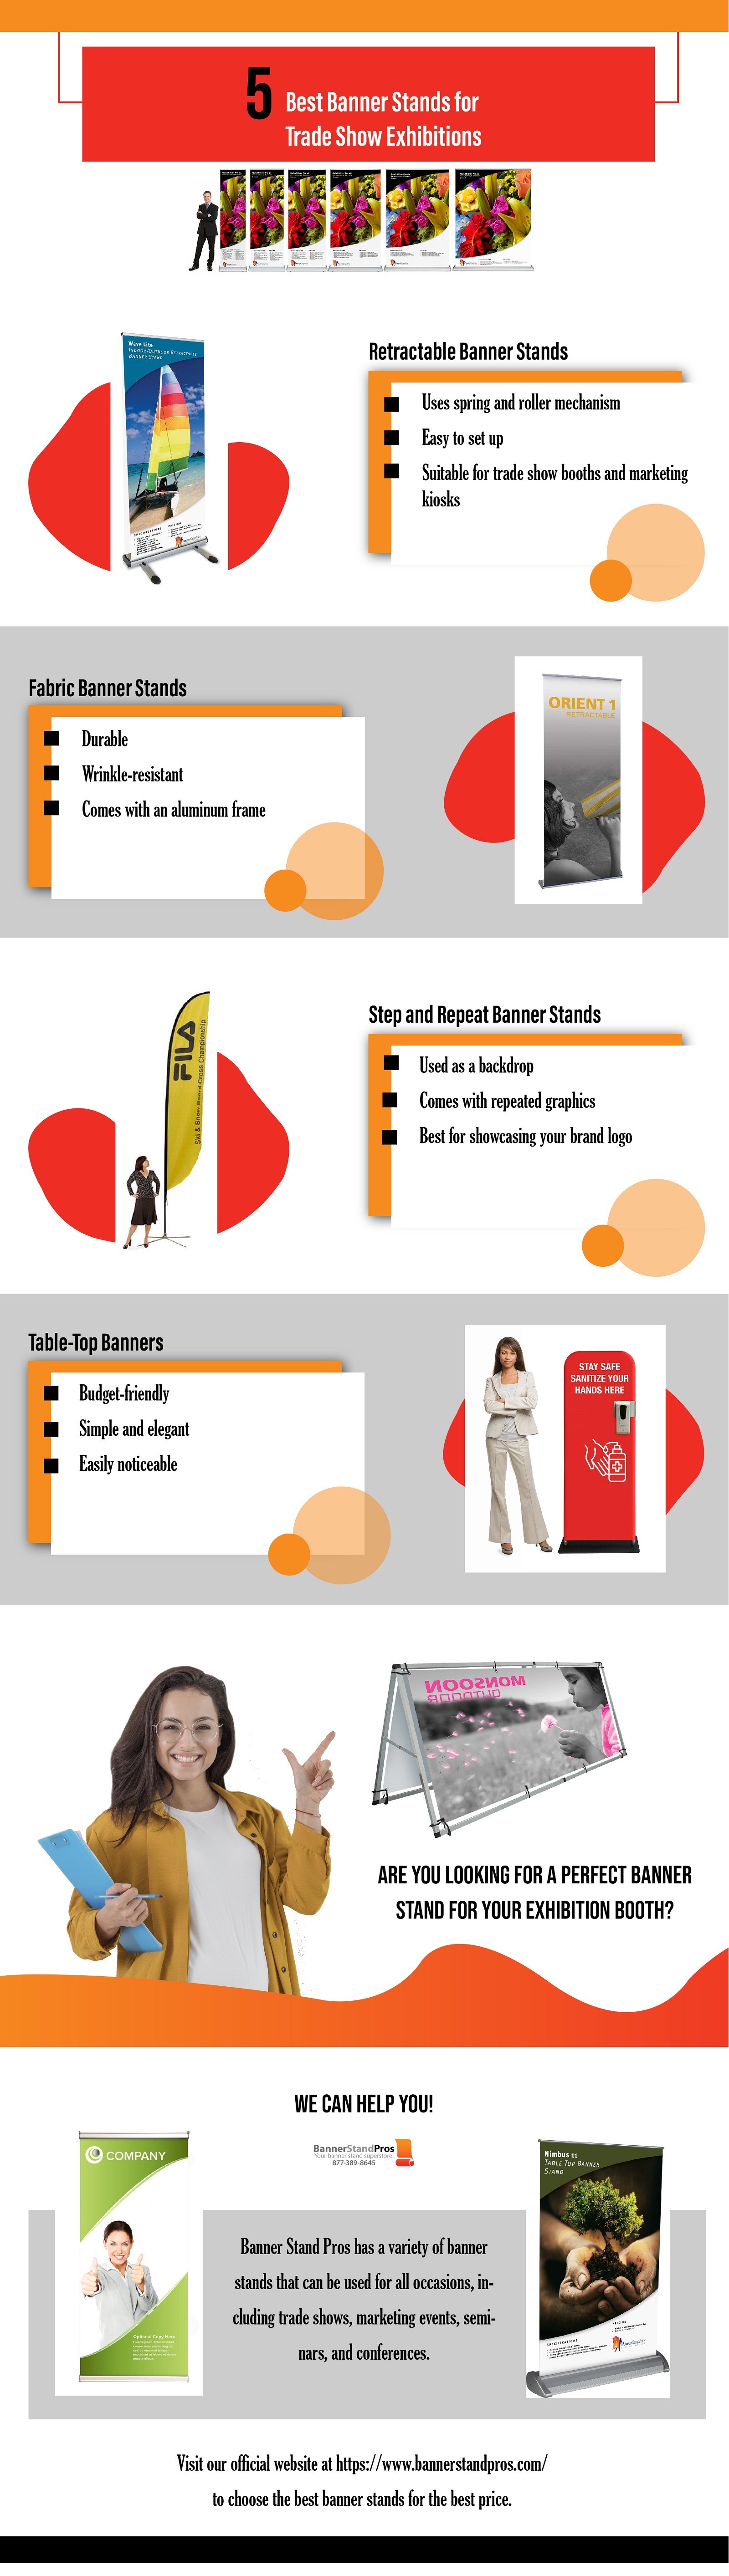 What You Must Know About Retractable Banner Stands